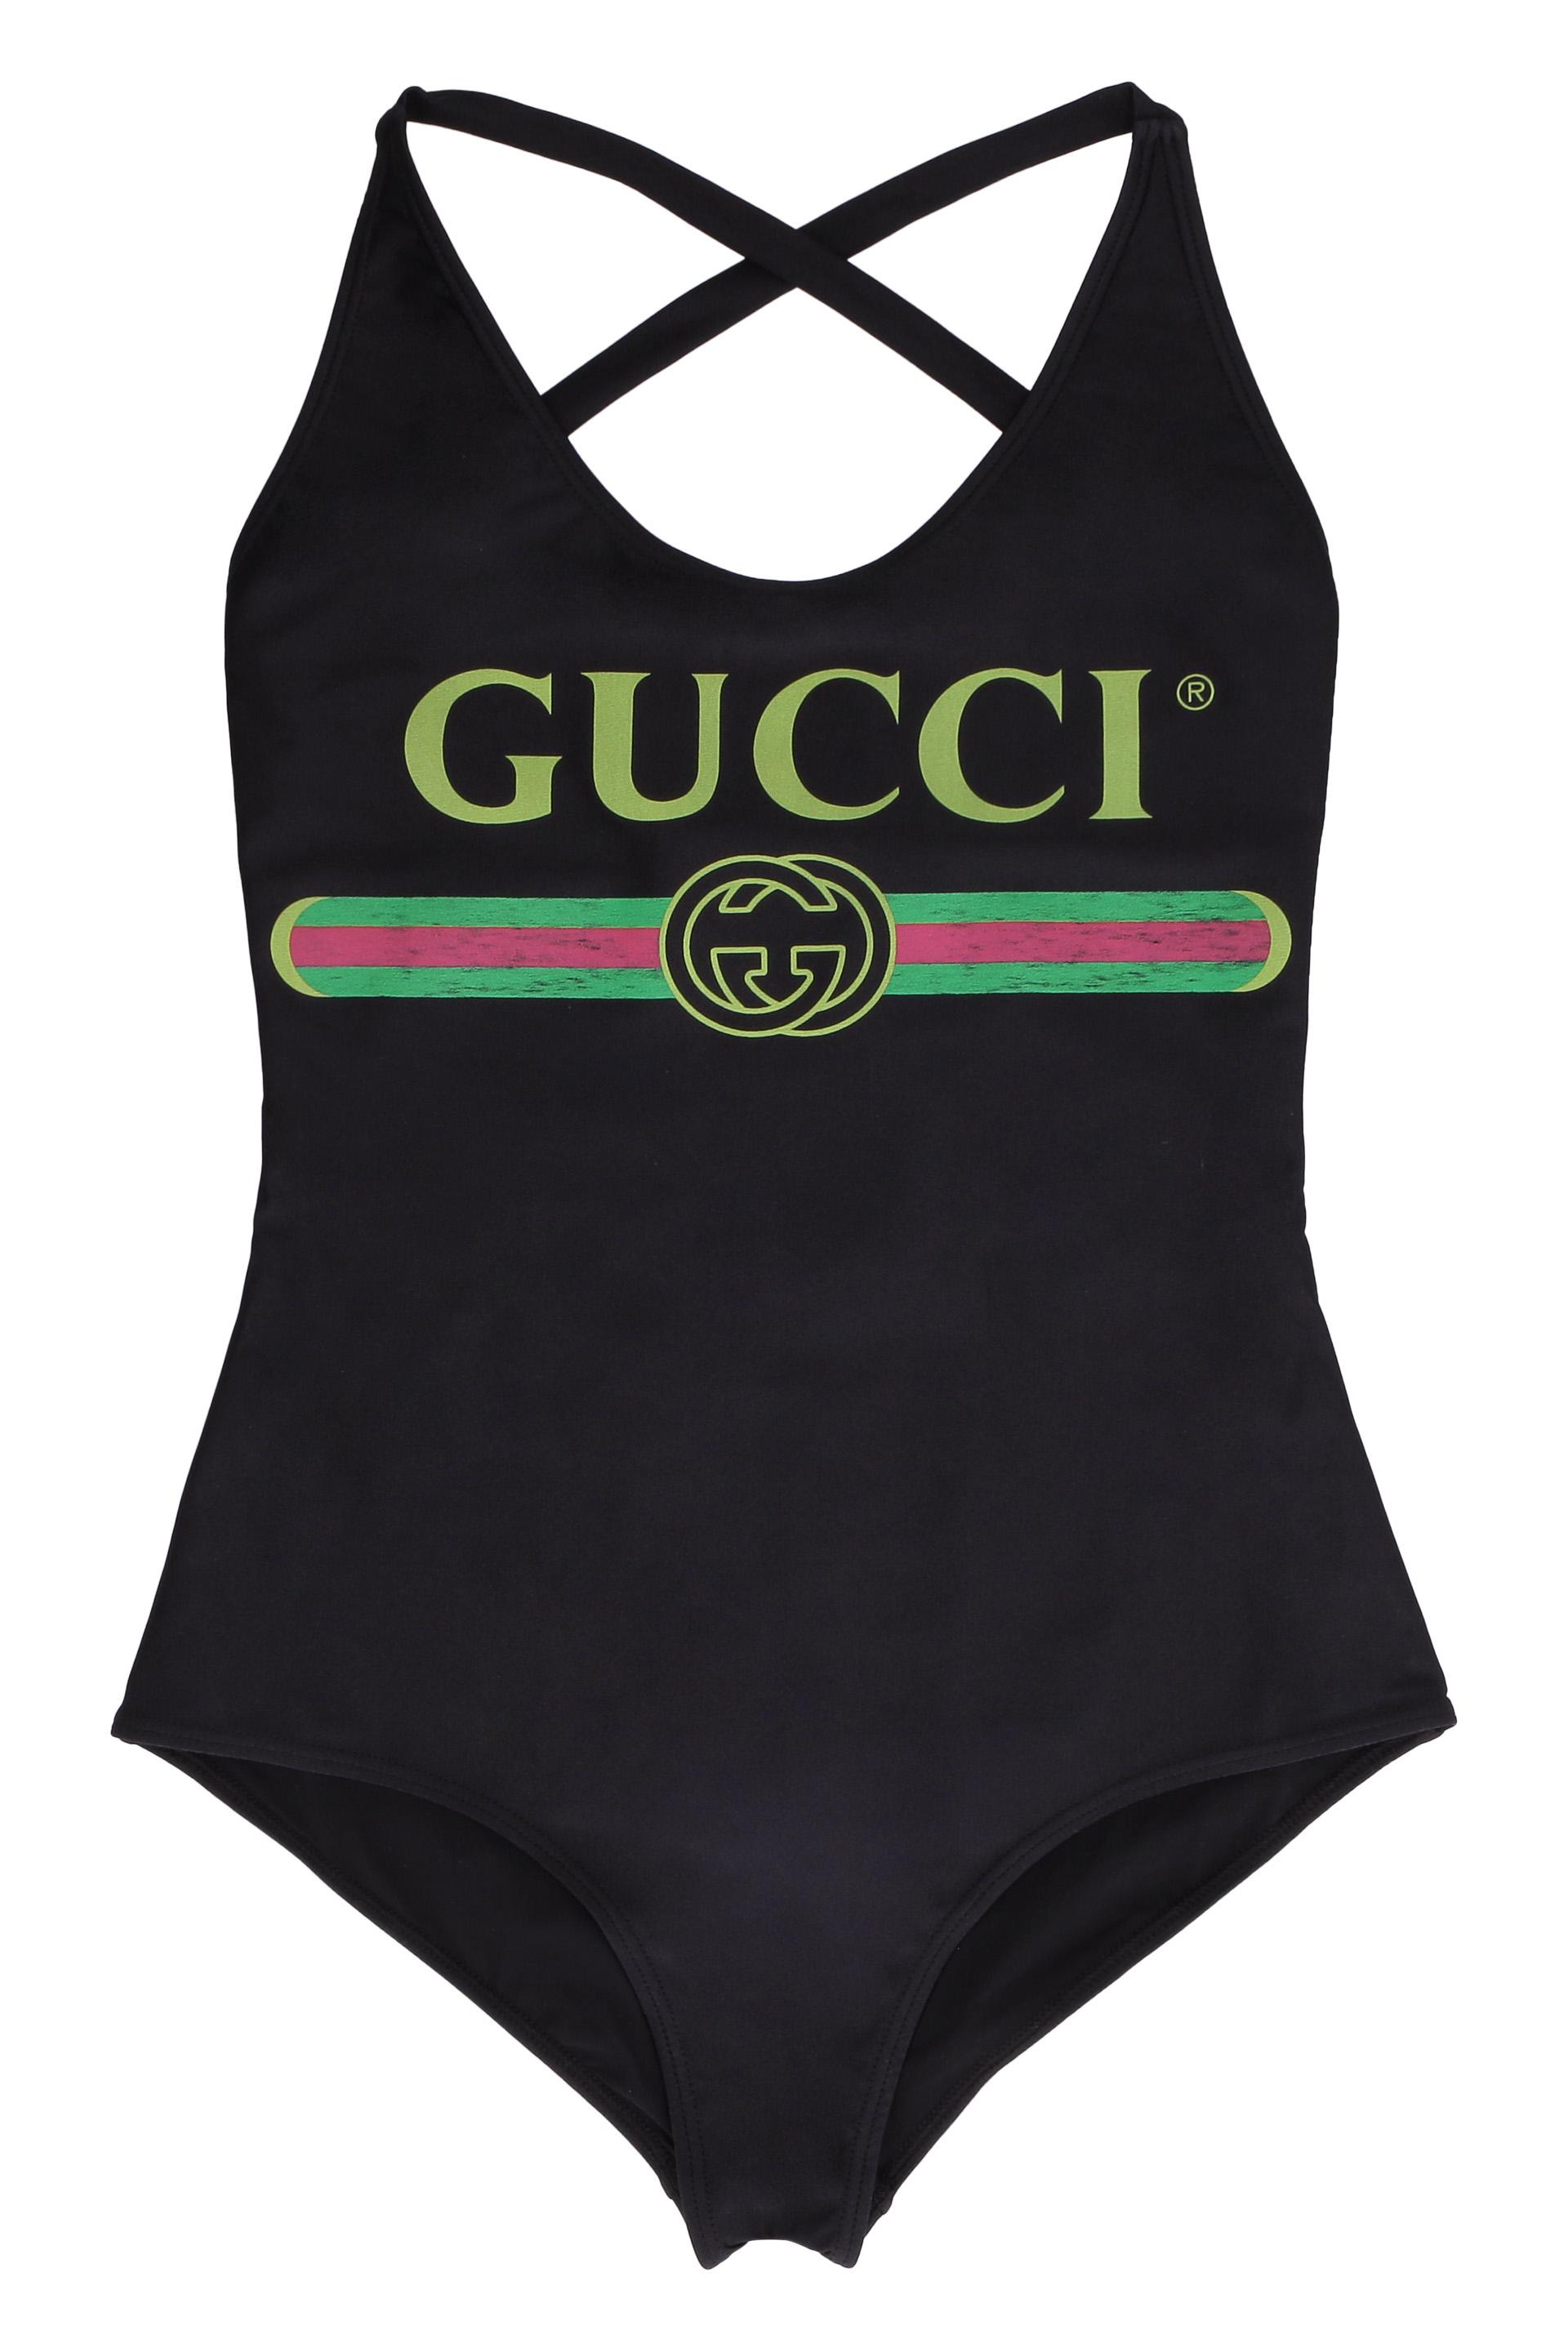 Gucci Synthetic Logo Print One-piece Swimsuit in Black - Lyst